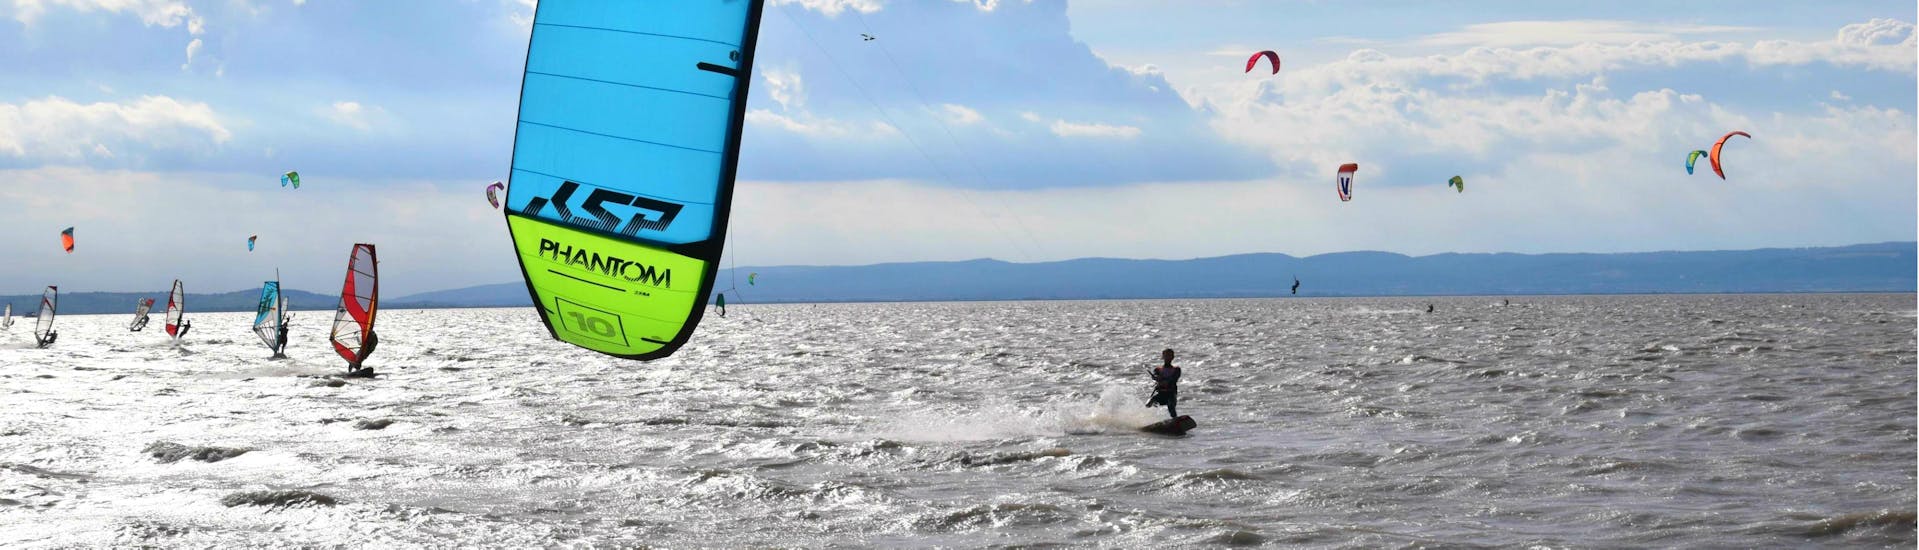 People are kitesurfing at the Lake Neusiedl